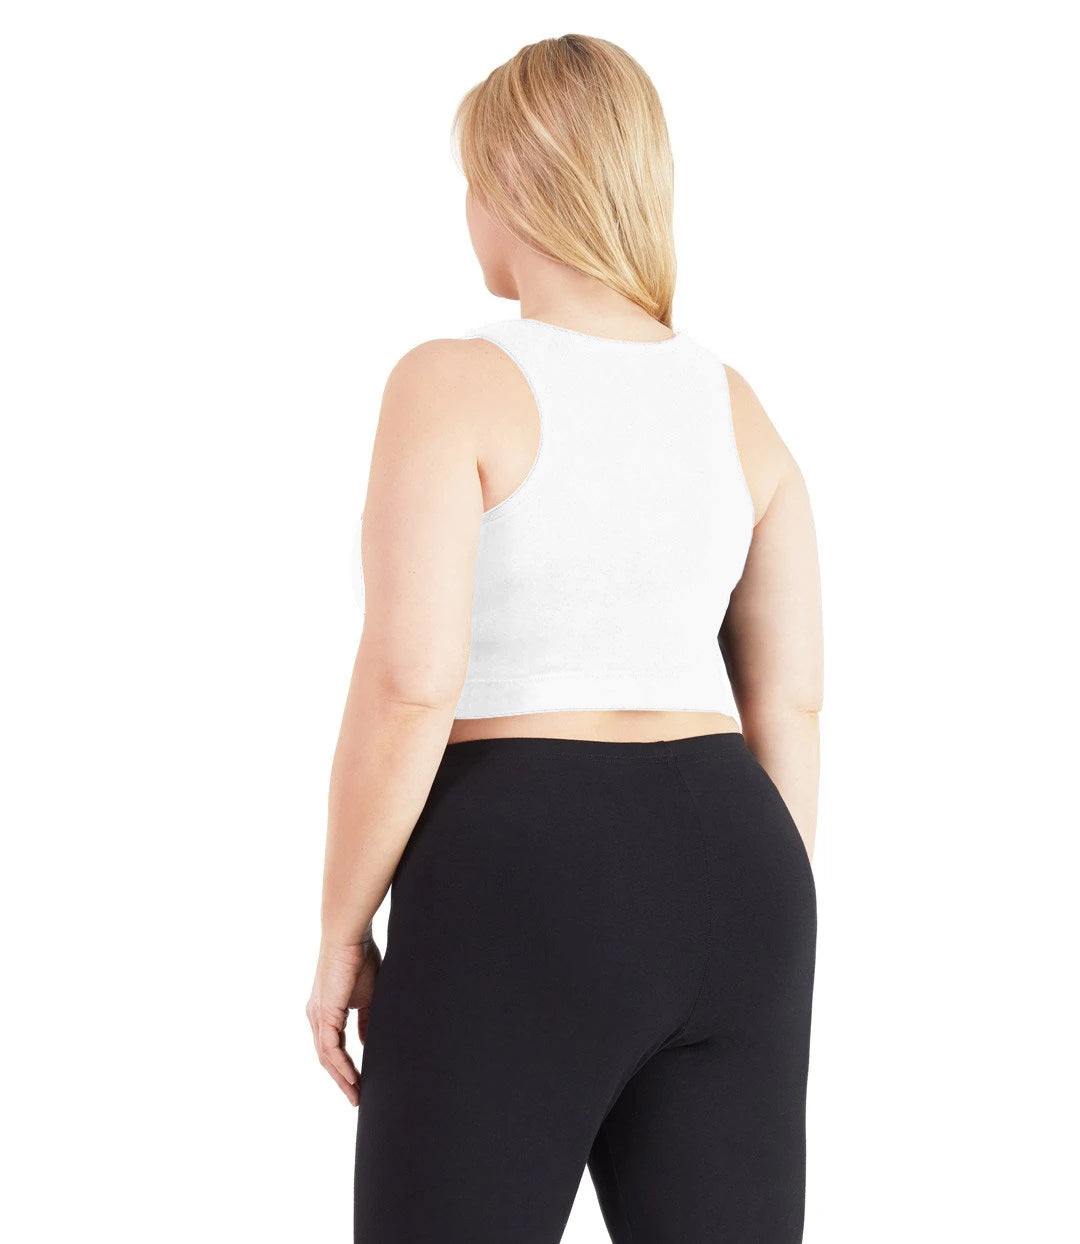 Plus size woman, facing back, wearing JunoActive plus size Stretch Naturals V-Neck Bra top in white. The woman is wearing black JunoActive plus size leggings. Her arms fall naturally to her side.